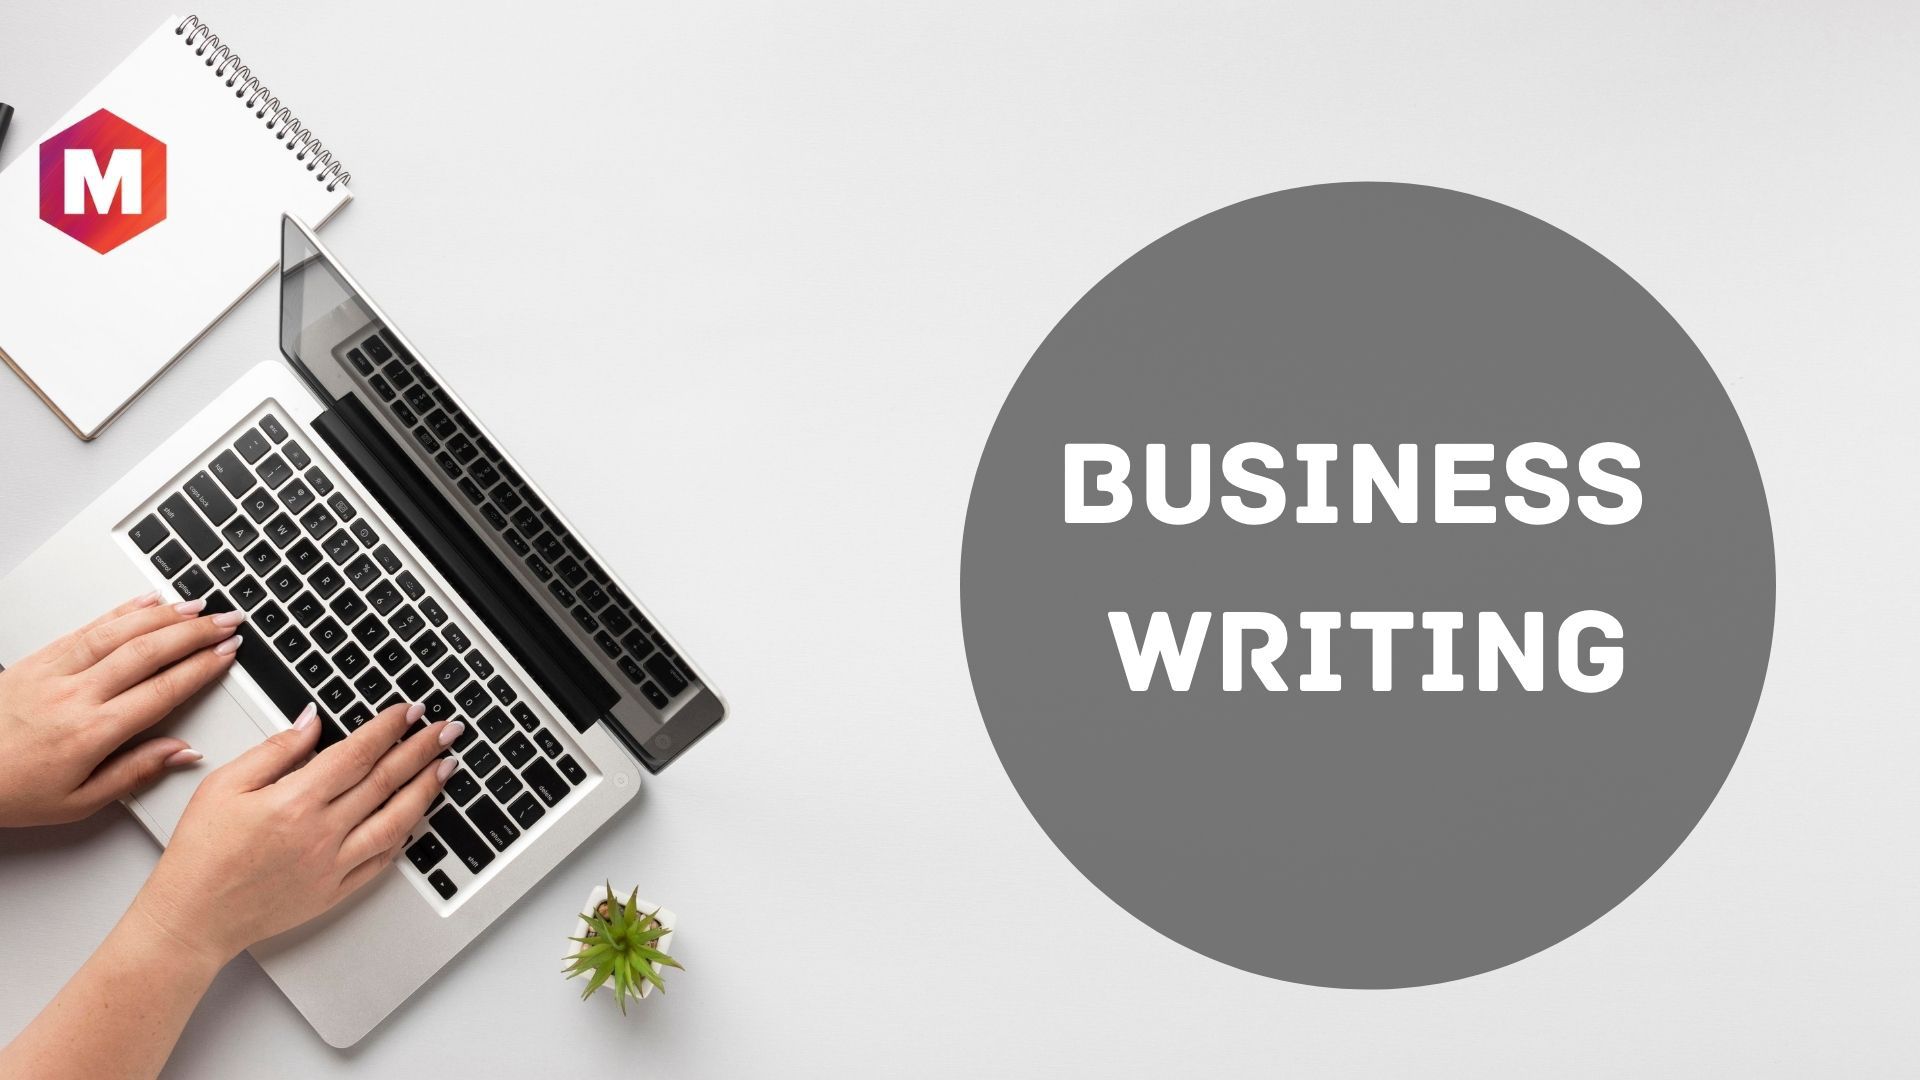 Business Writing - Definition, Principles ,Types and Tips | Marketing91